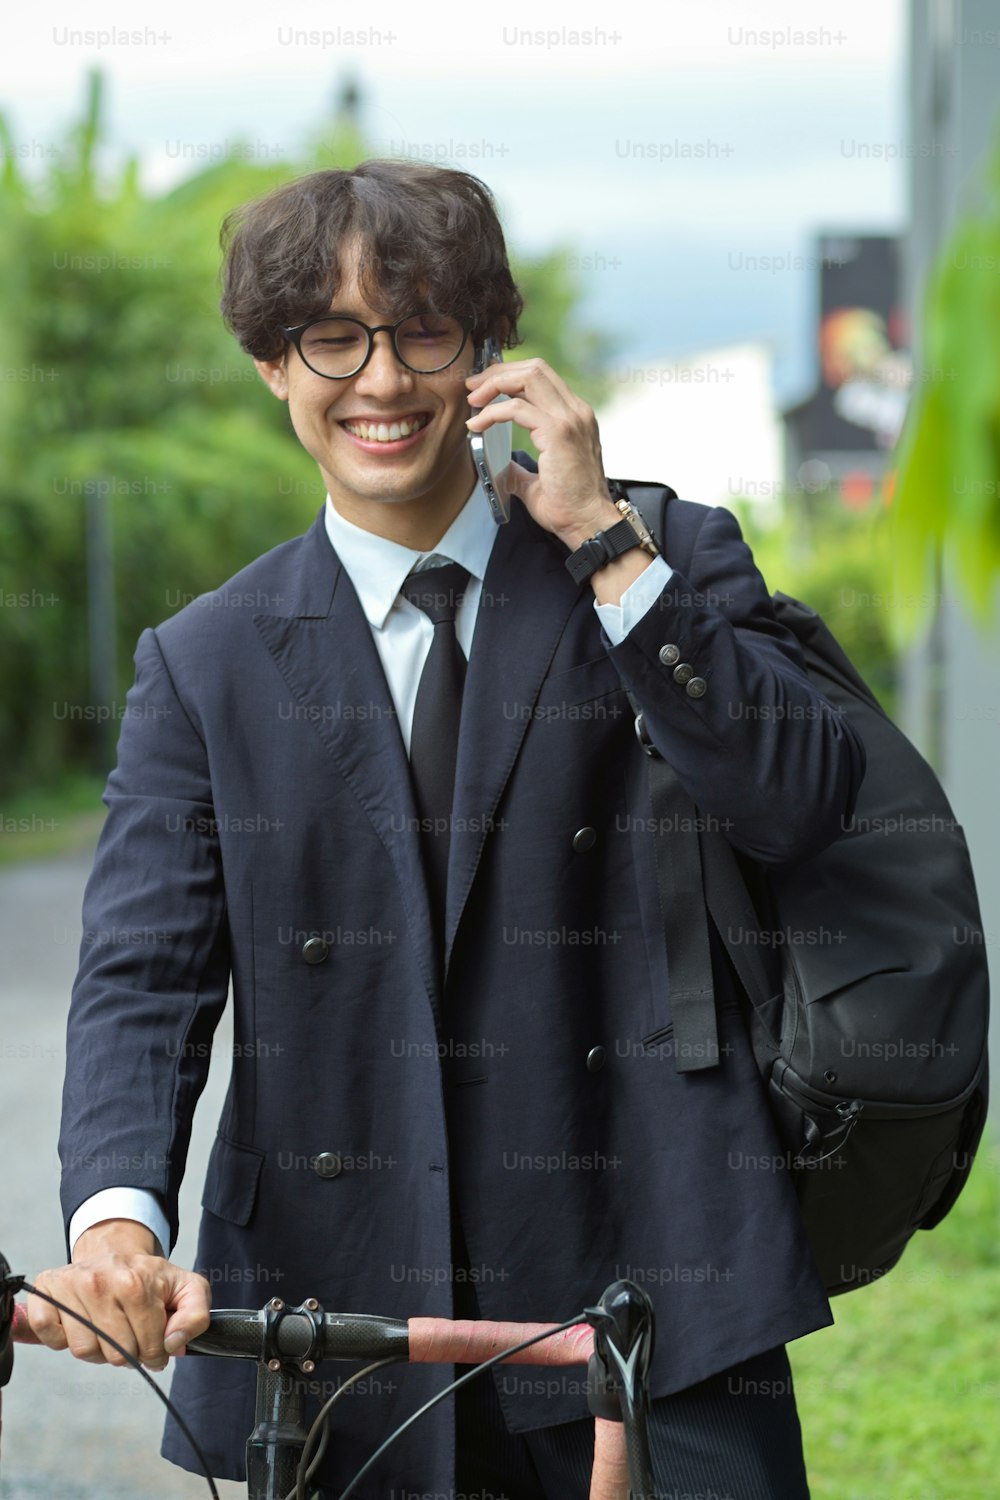 Urban successful businessman talking on the phone while walking and pushing bicycle to work on the street.